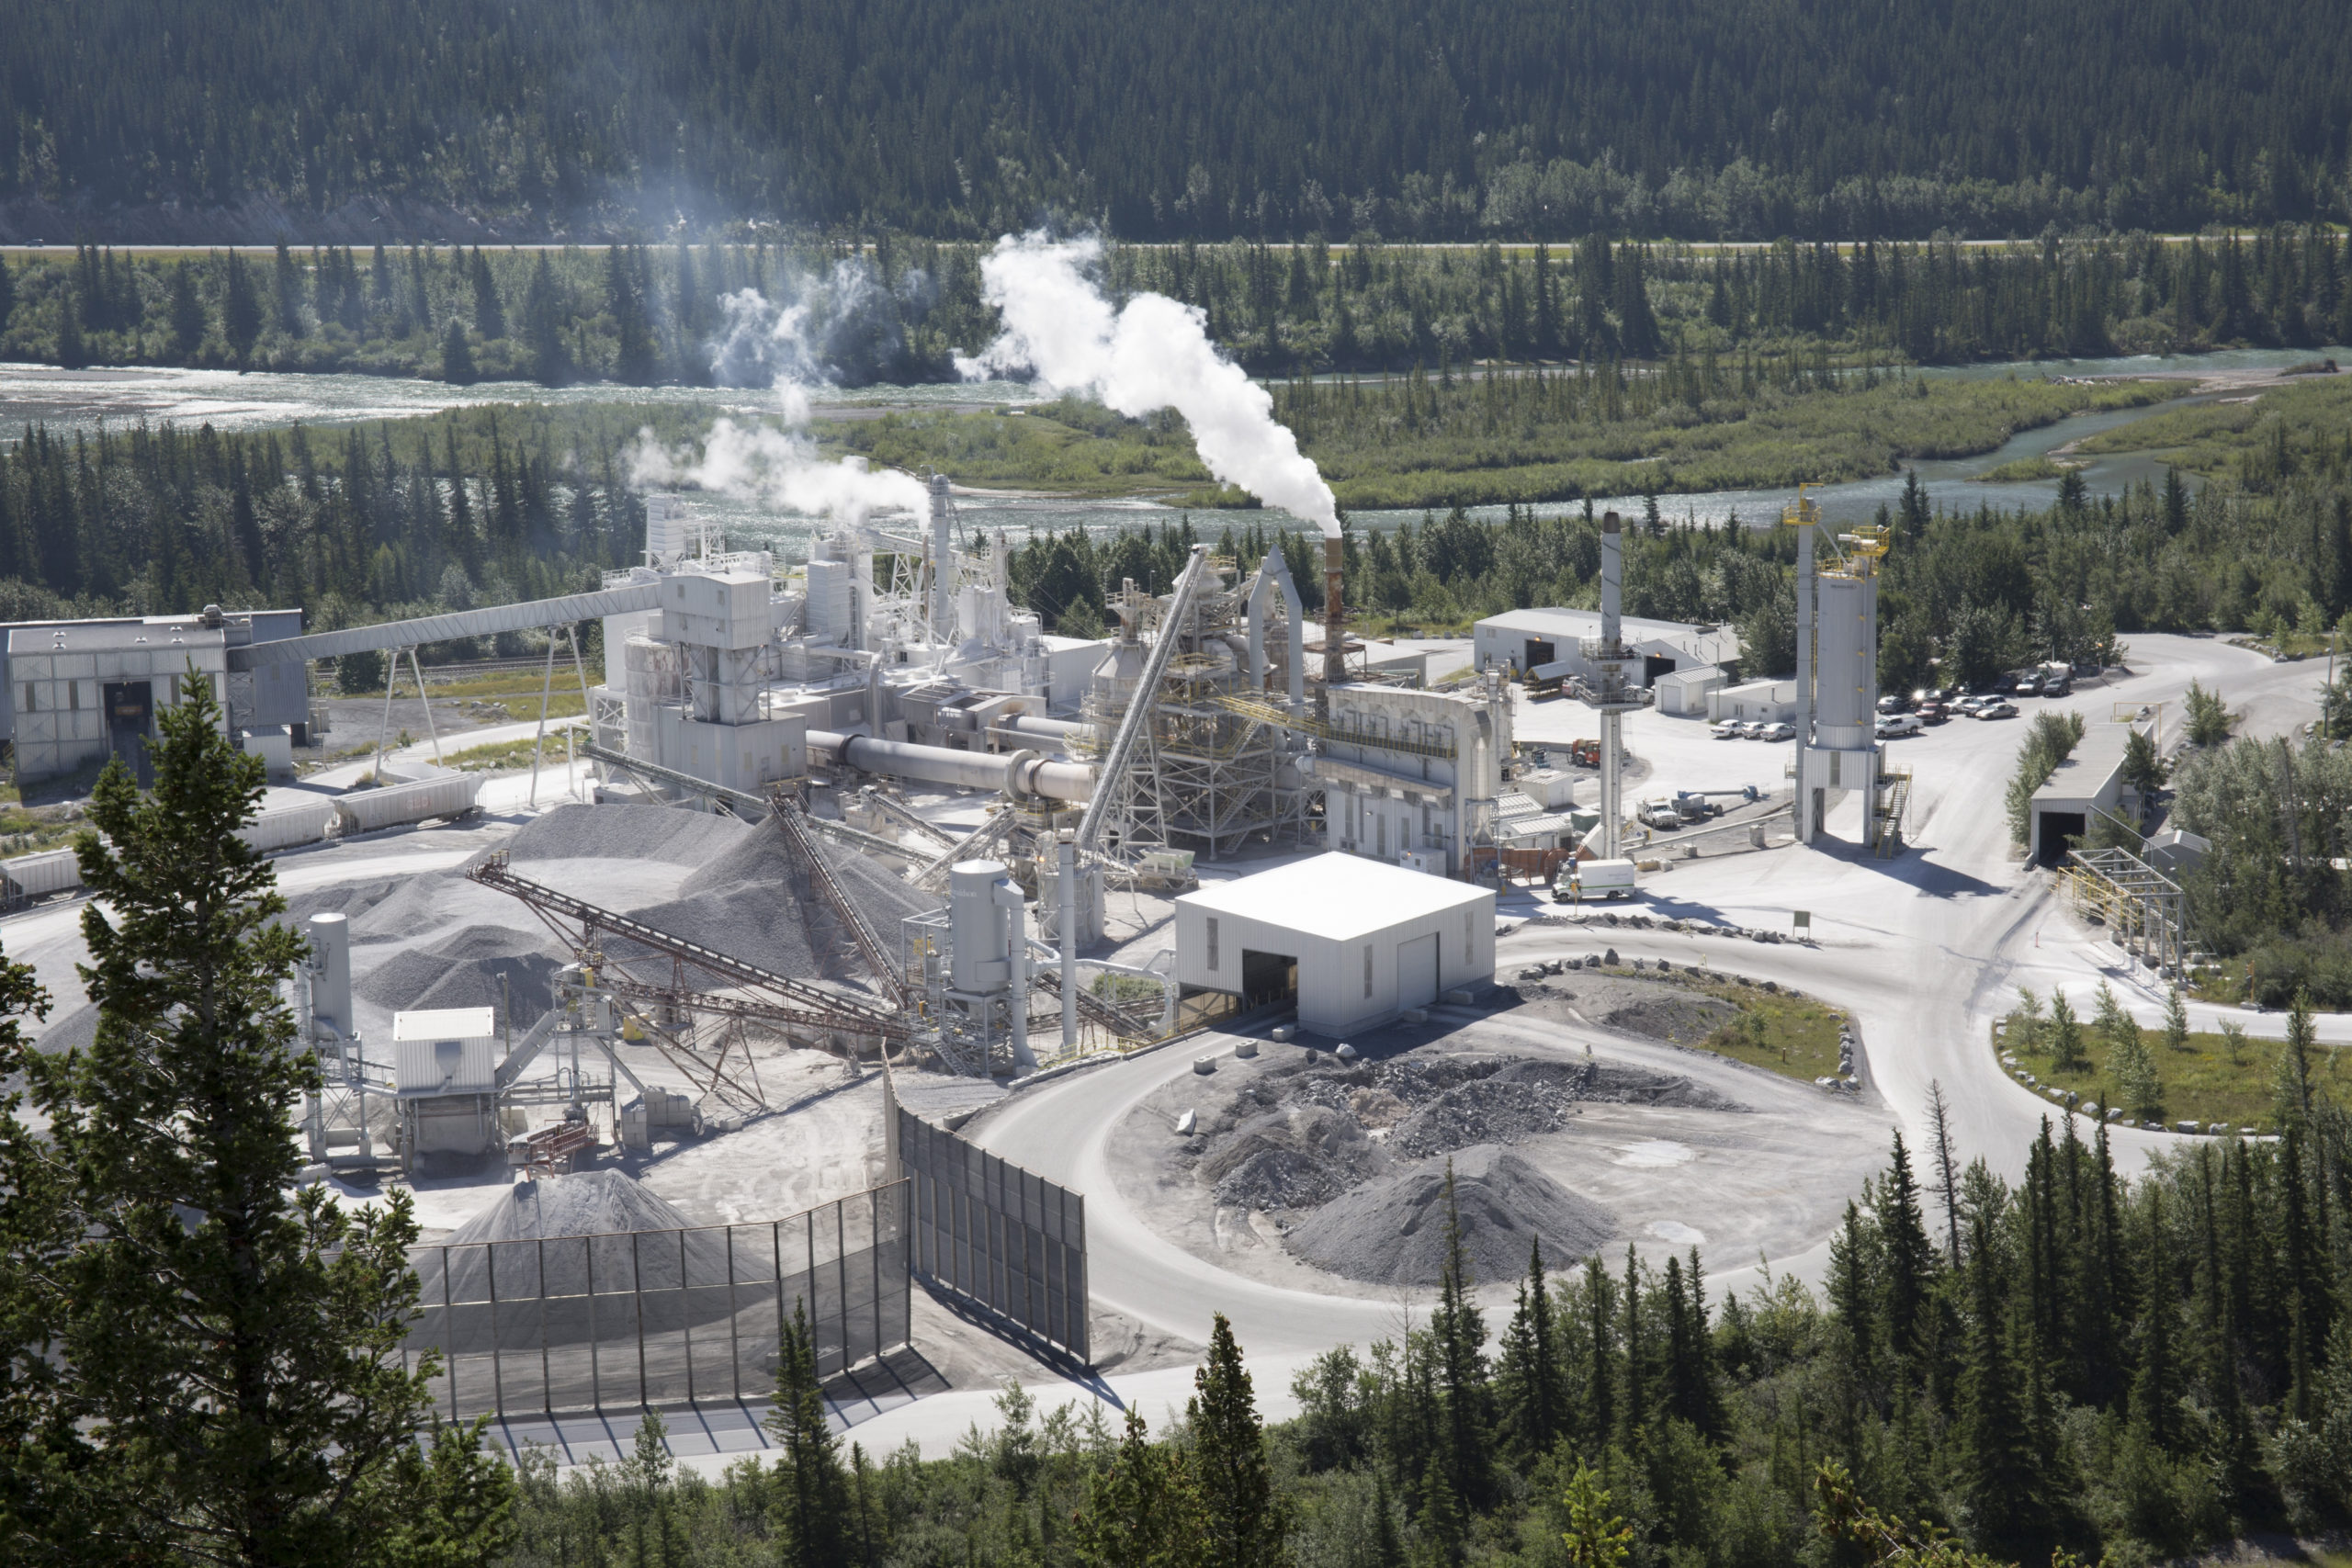 A cement manufacturing plant is sending up plumes of smoke in broad daylight surrounded by green grass and trees.